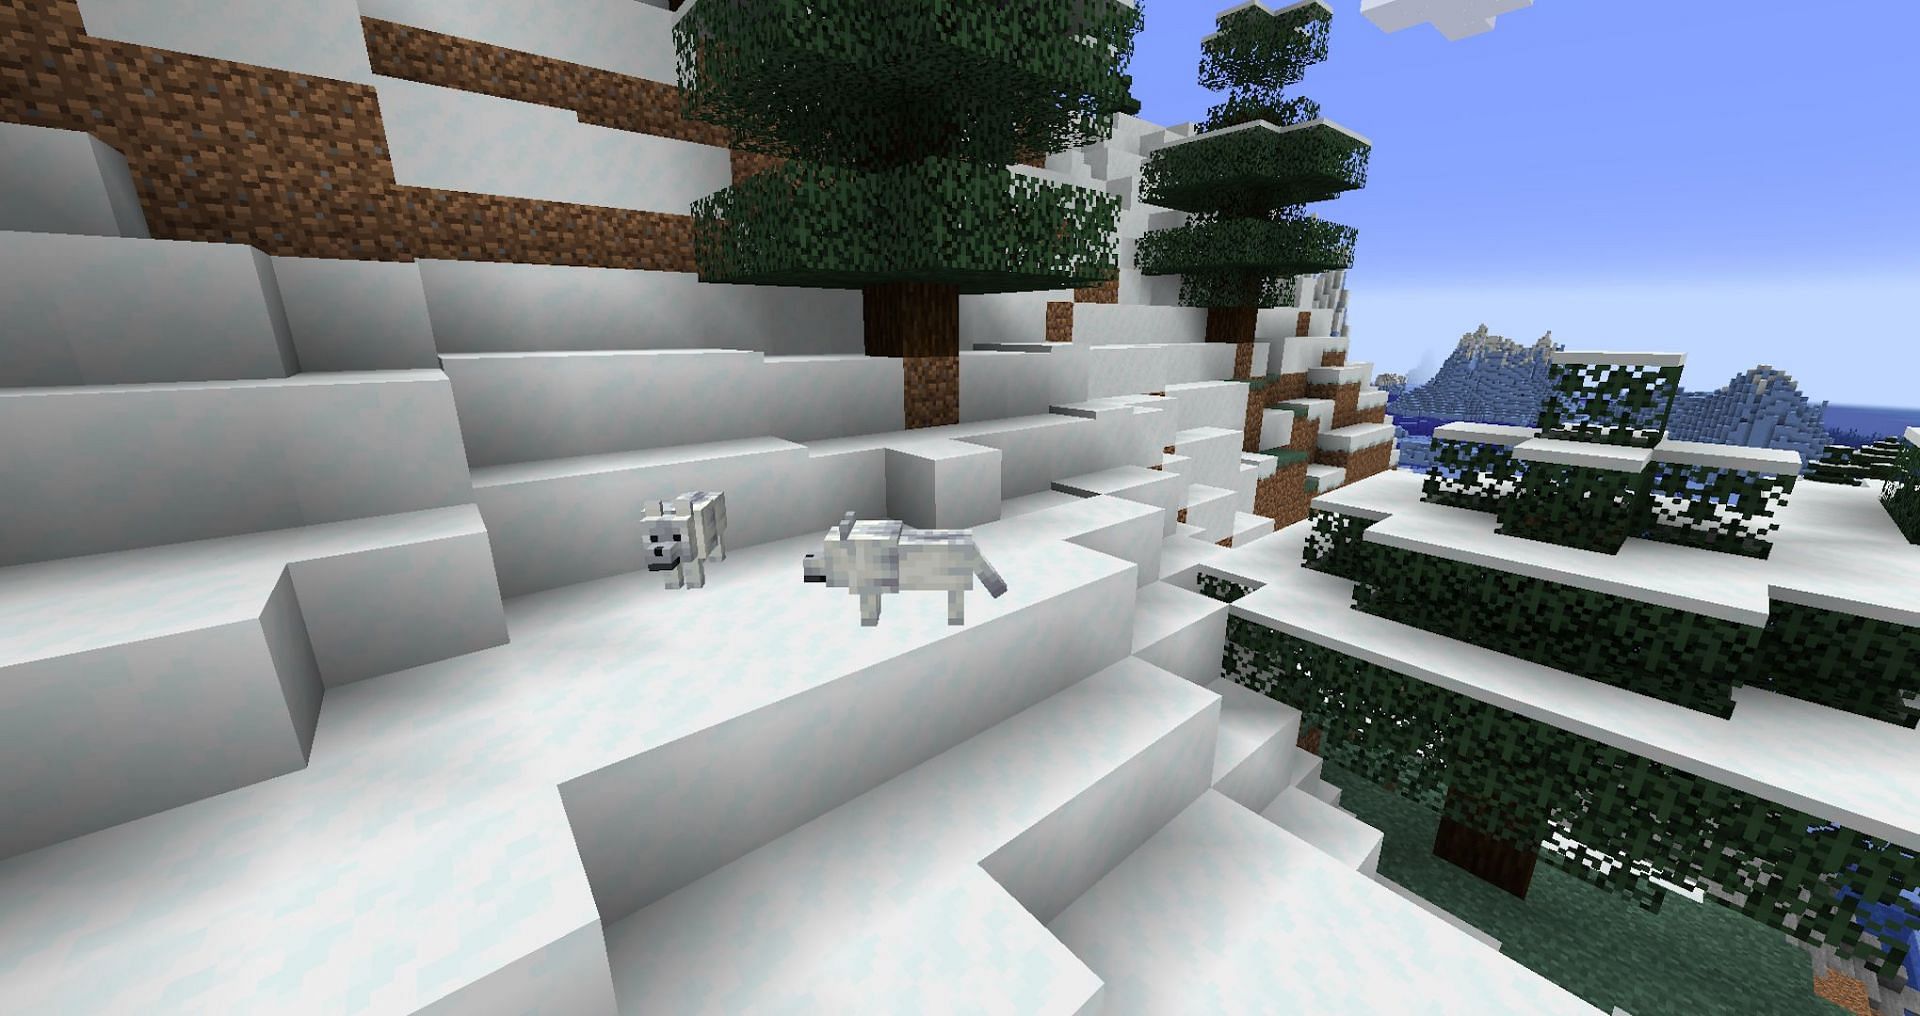 Groves are now a bastion for wolves. (Image via Mojang)